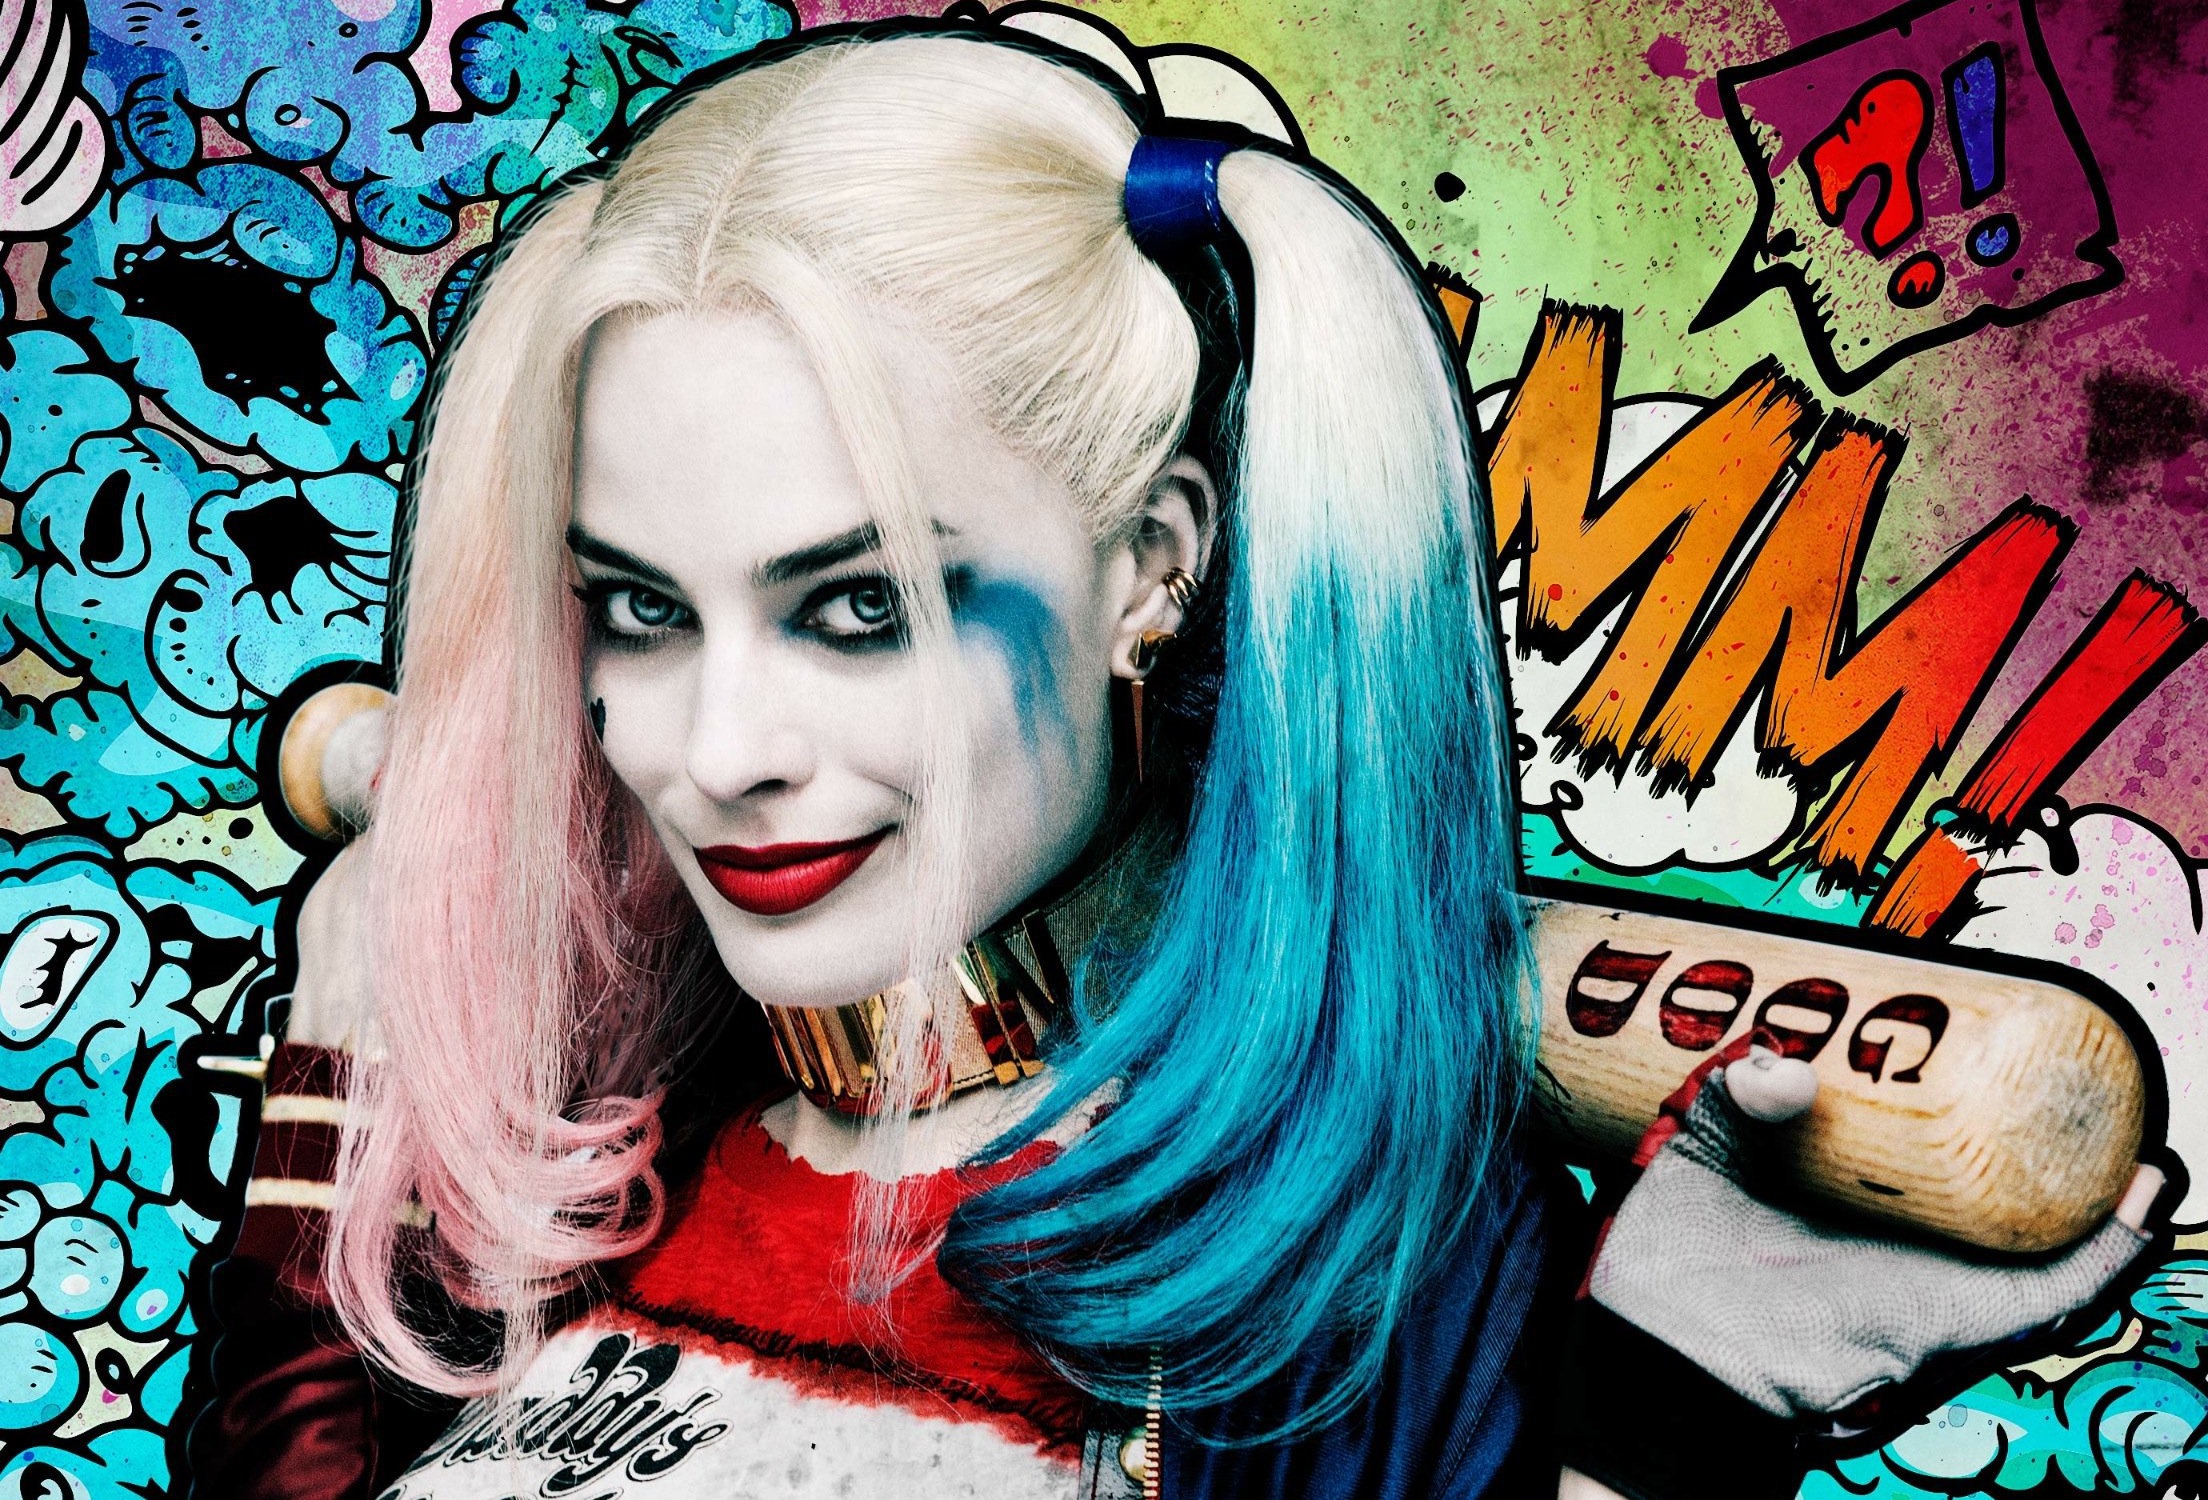 harley quinn, blue eyes, suicide squad, movie, baseball bat, blonde, dc comics, margot robbie, smile, two toned hair cellphone